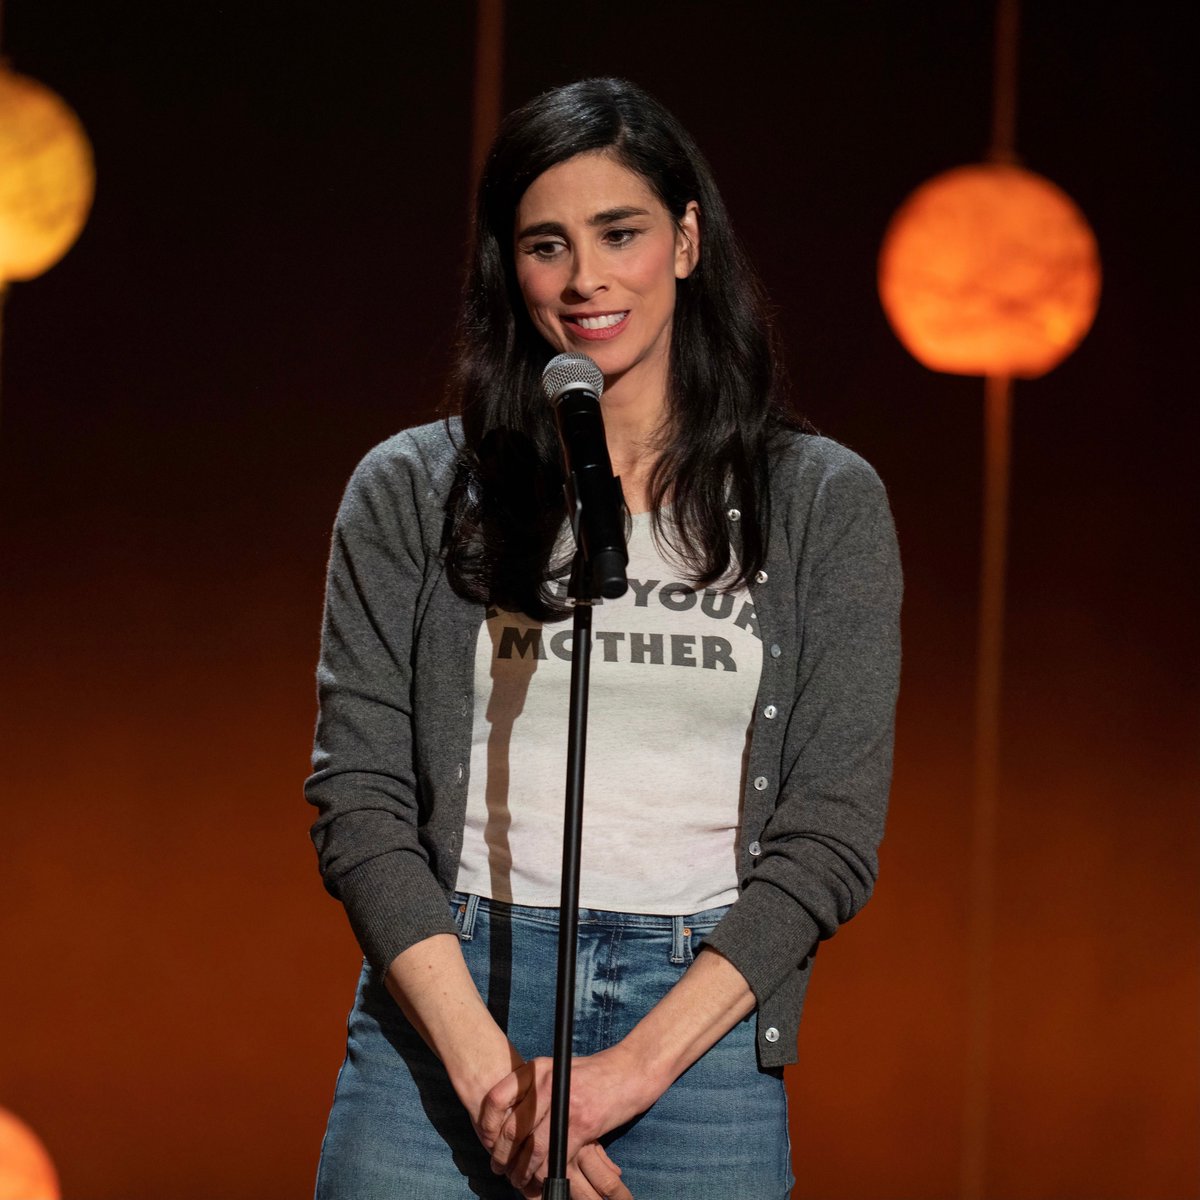 She's coming back home.

A new special from #SarahSilverman is coming this May to @hbomax.